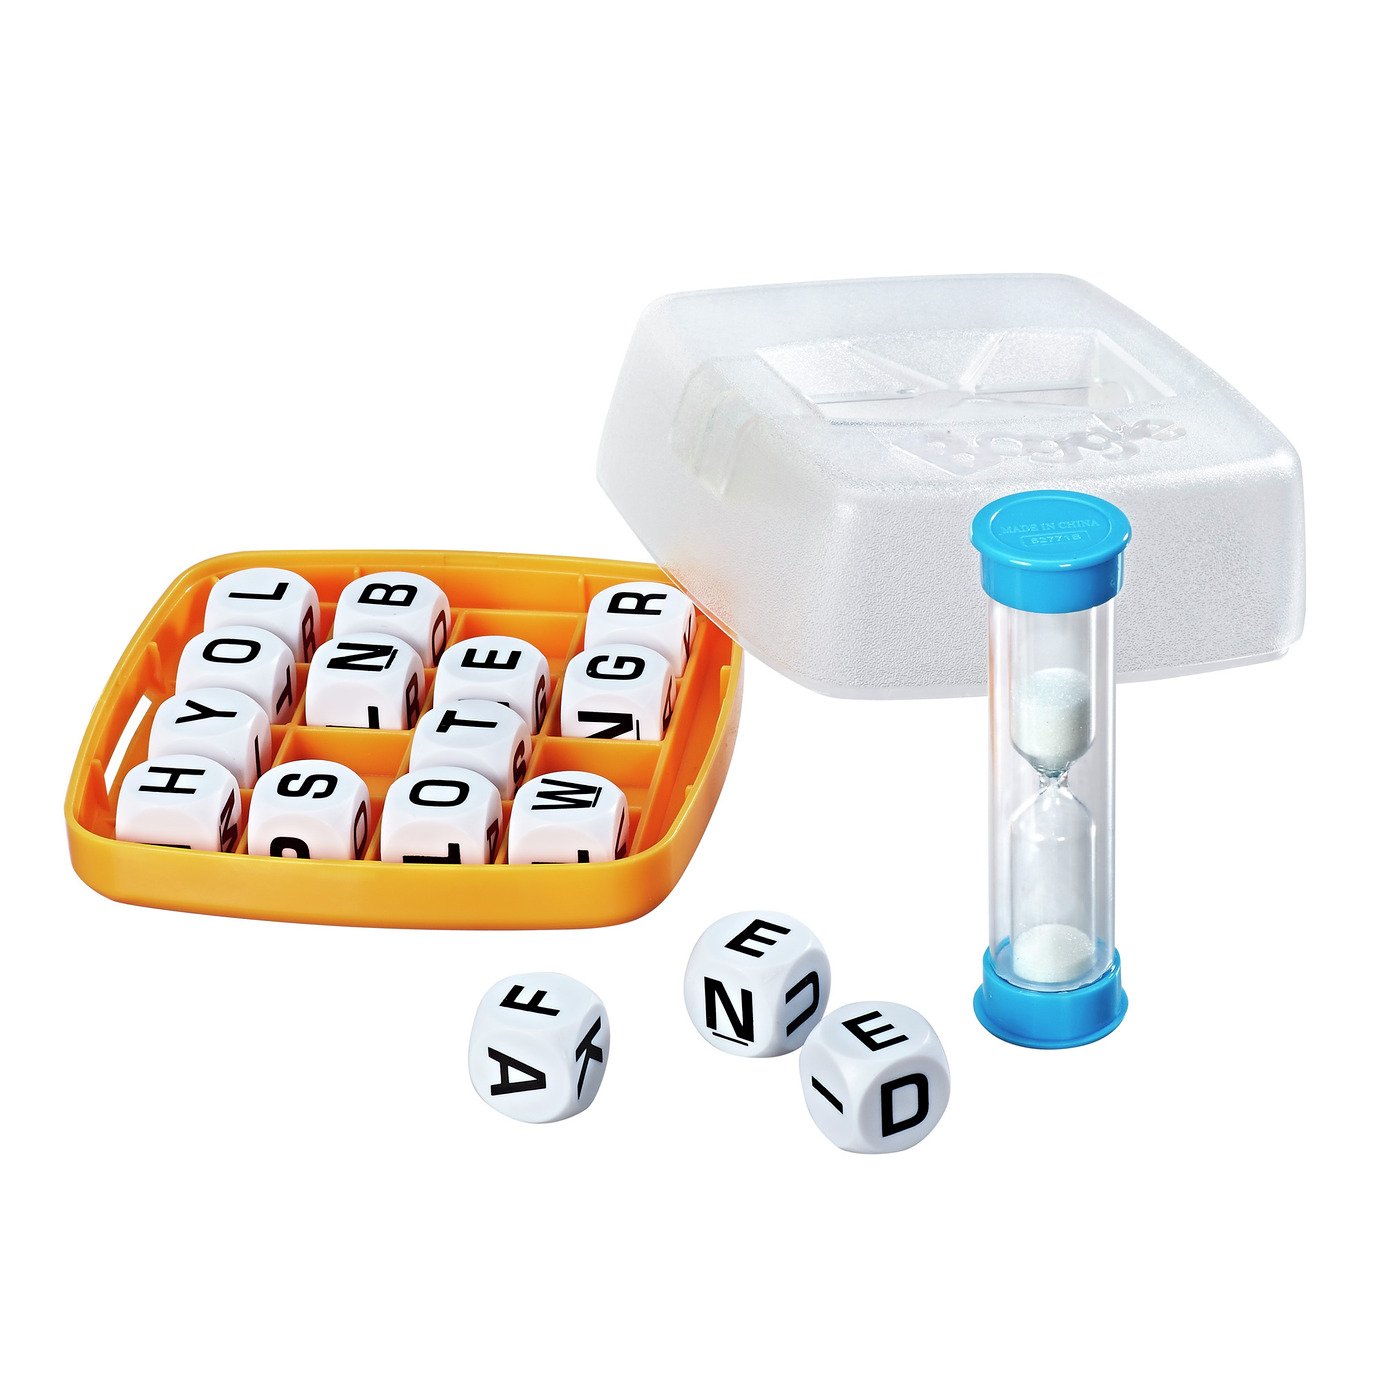 Boggle Classic from Hasbro Gaming